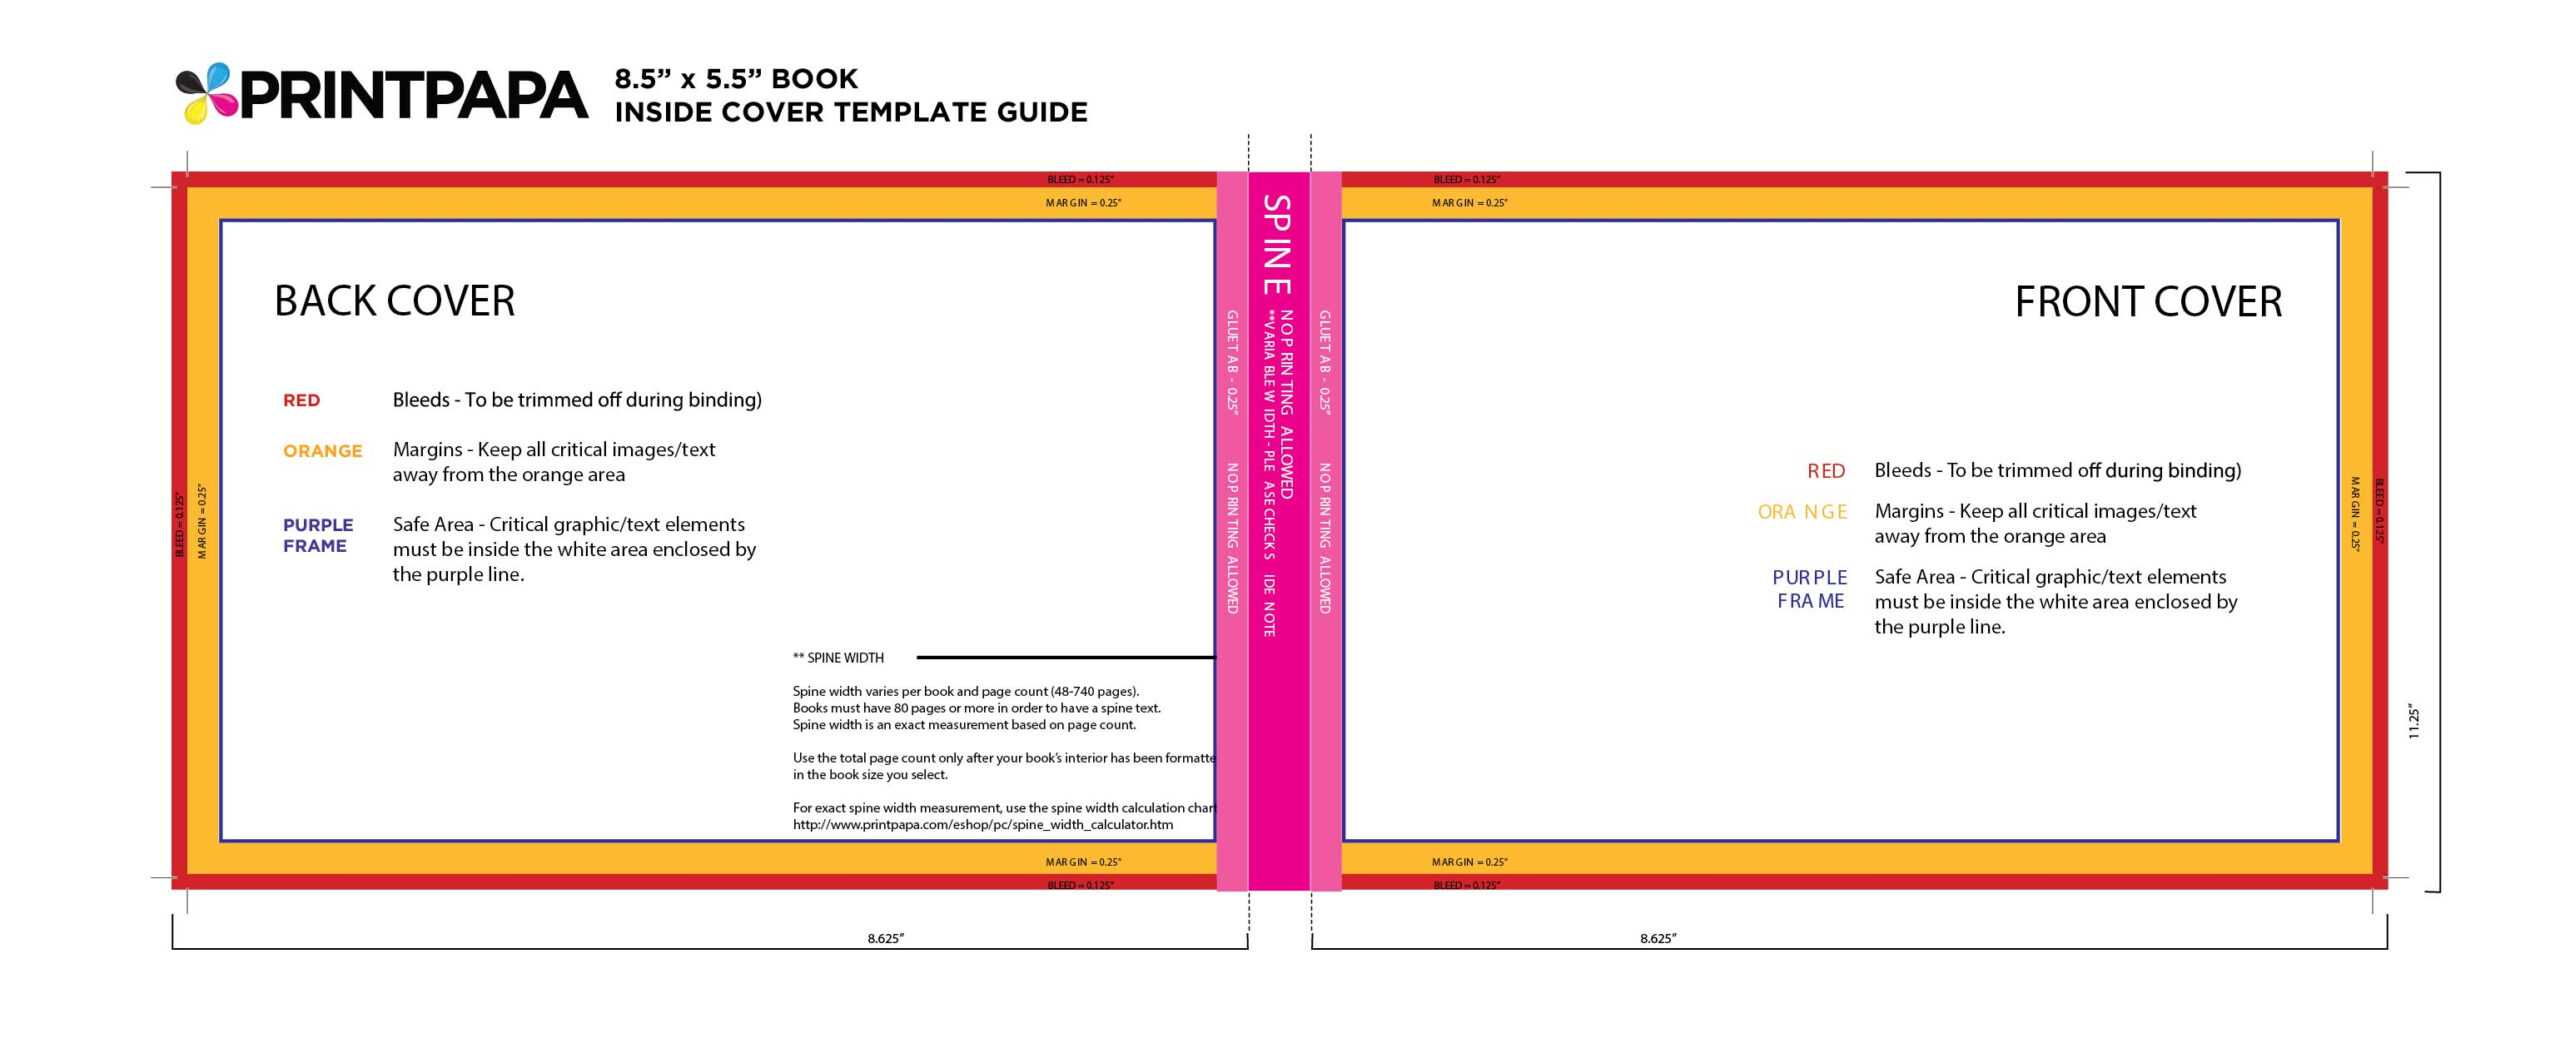 Find A Printing Template :: Printpapa Within 6X9 Book Template For Word